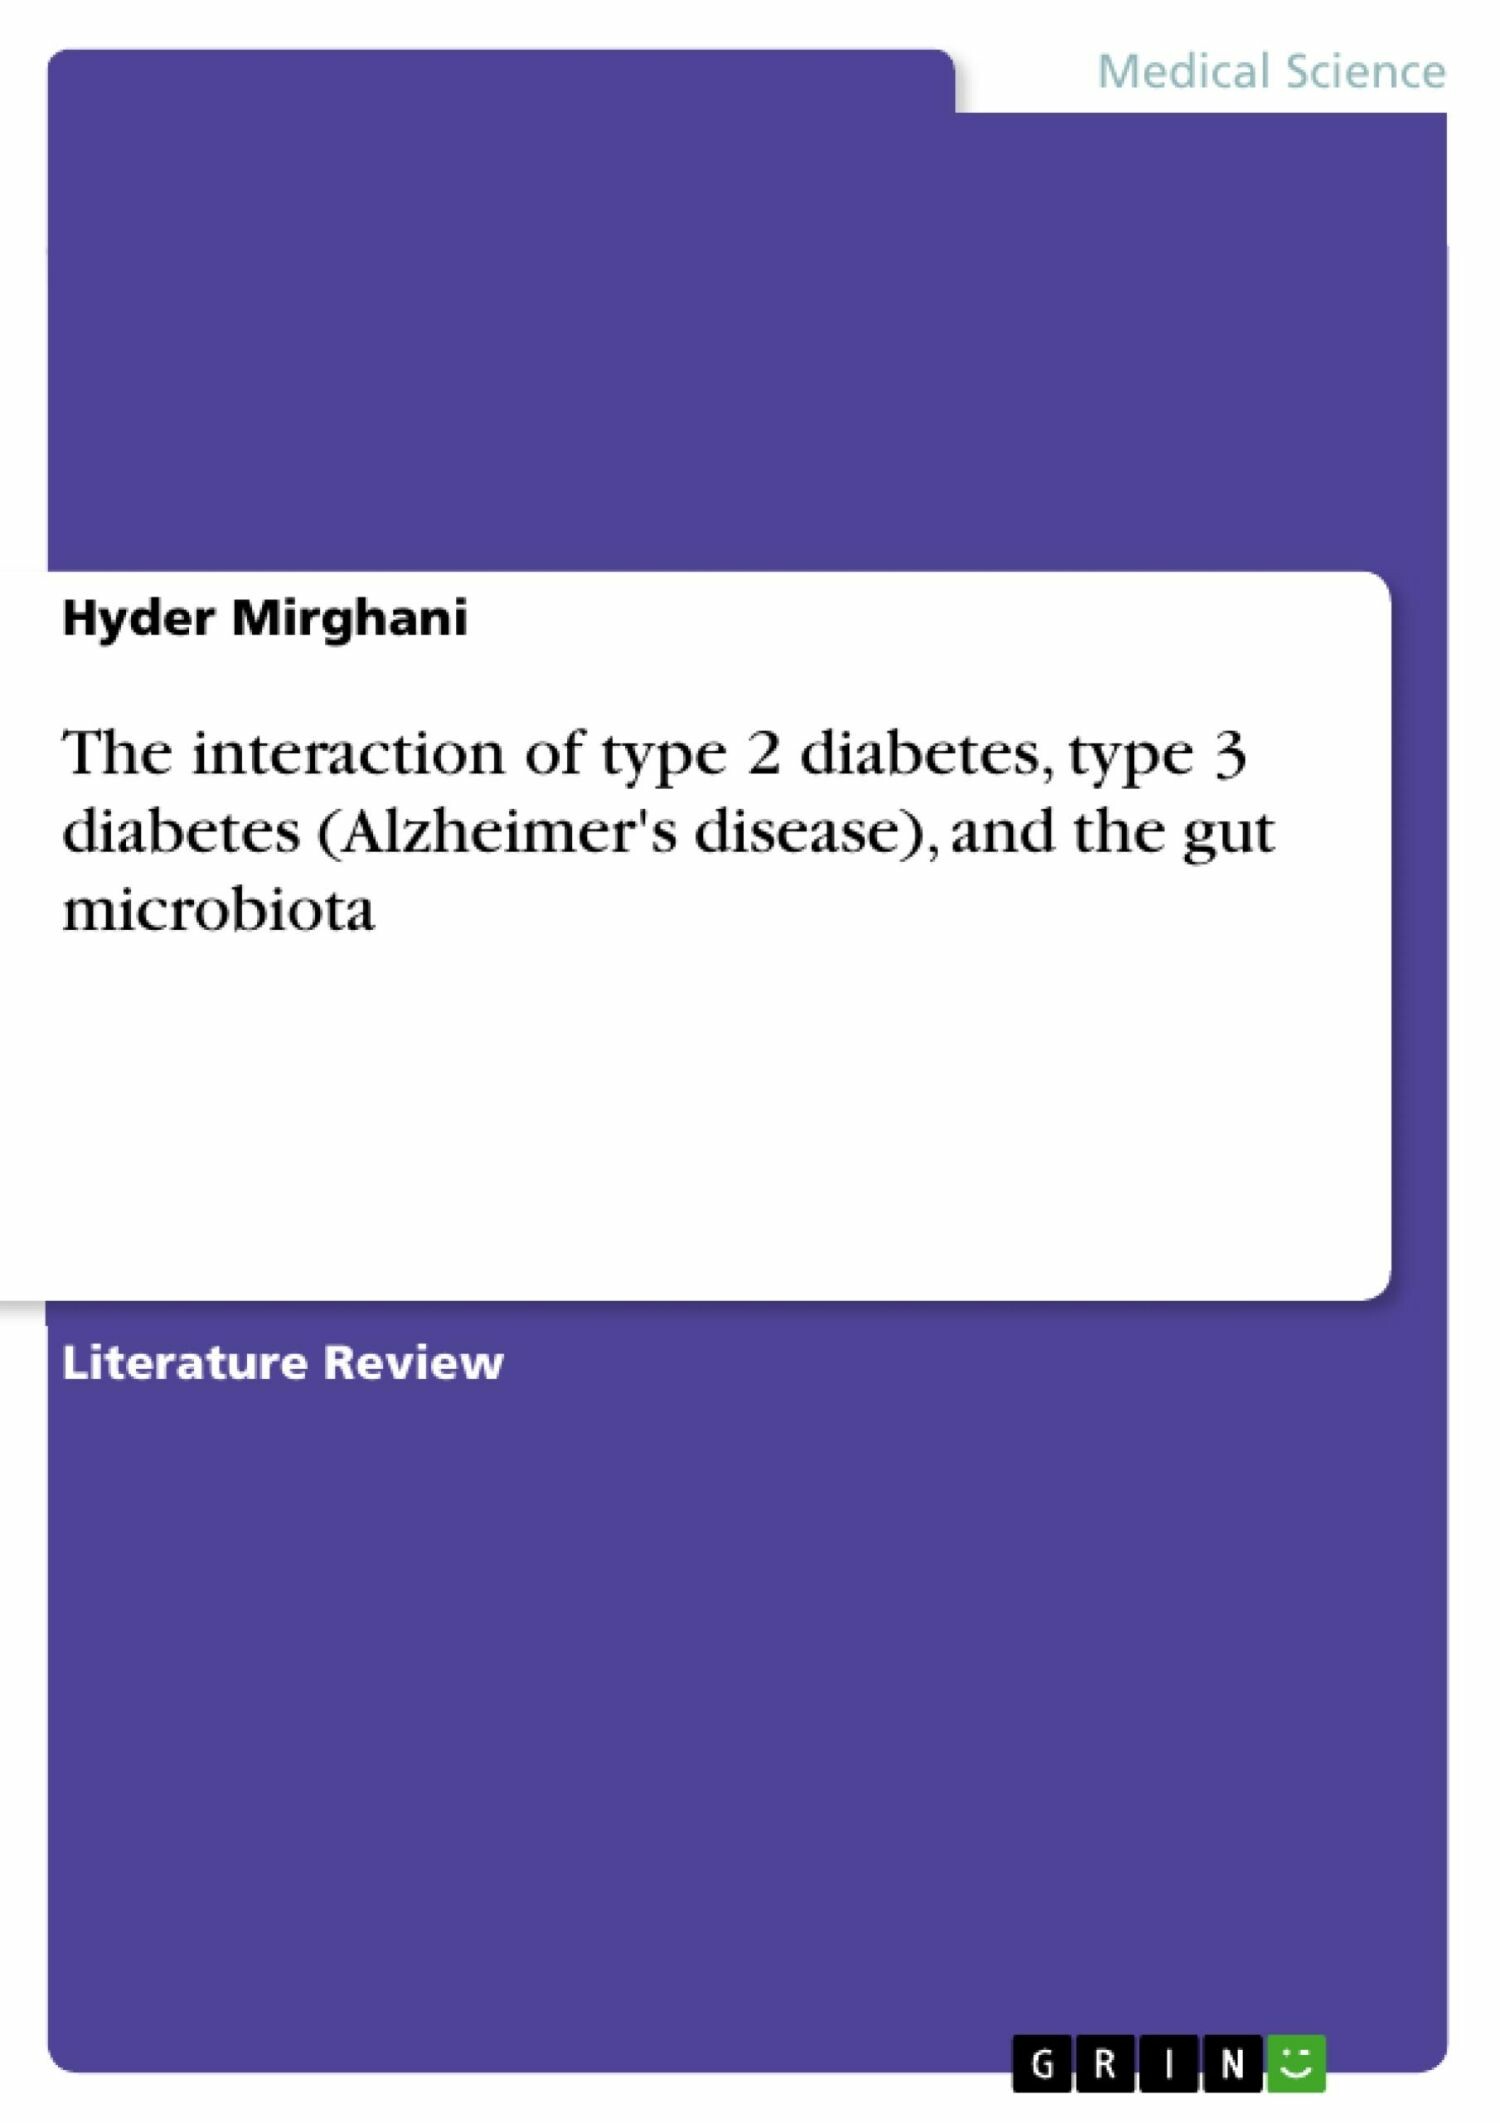 The interaction of type 2 diabetes, type 3 diabetes (Alzheimer's disease), and the gut microbiota